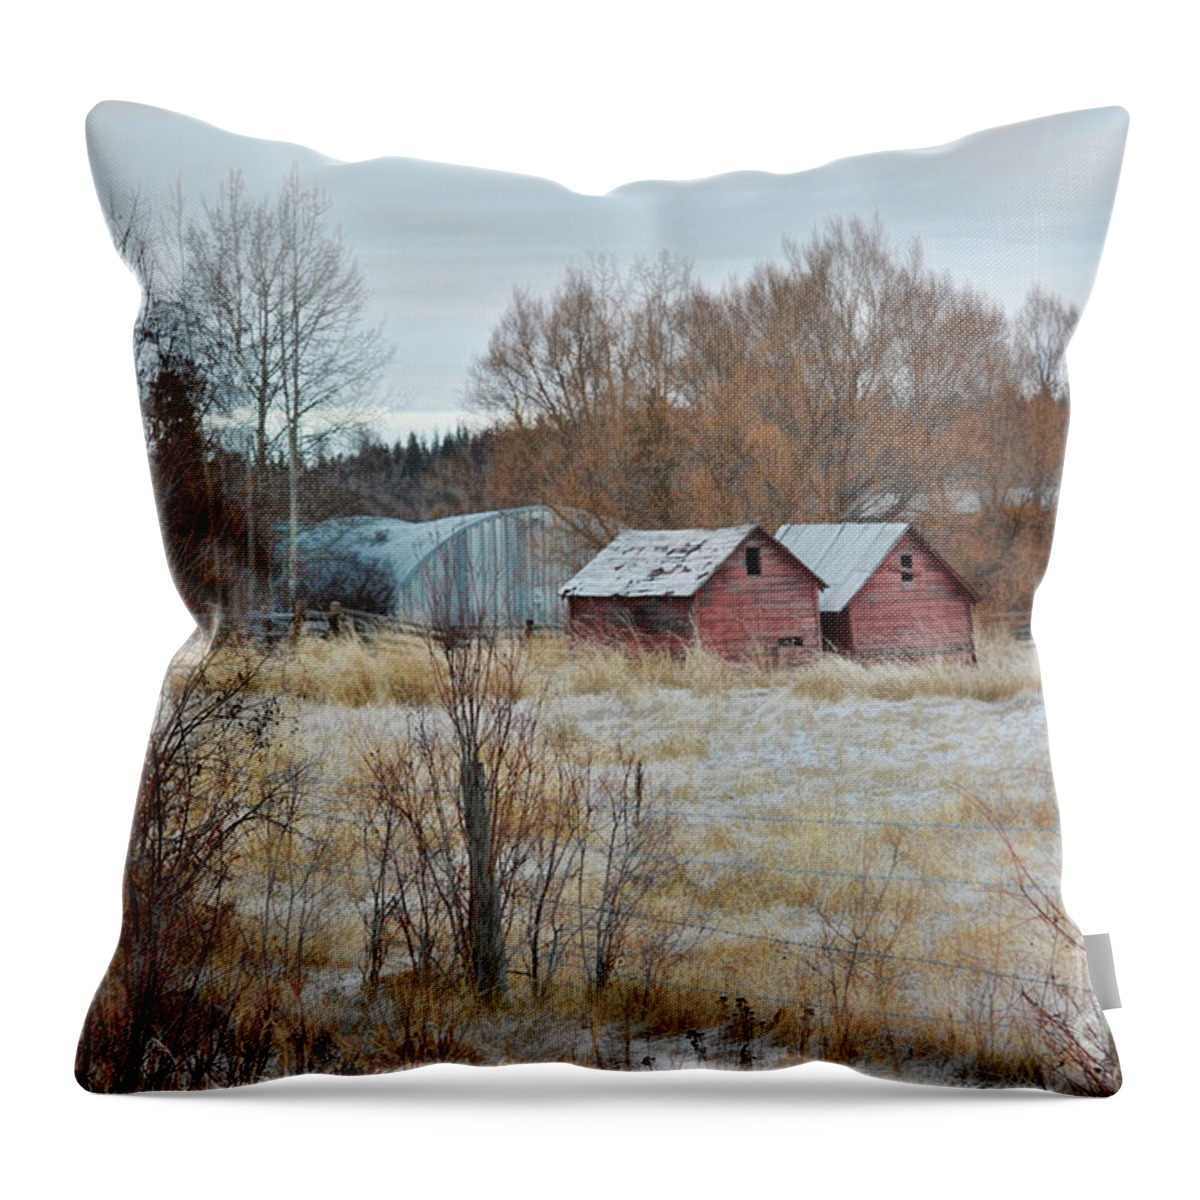 Cabin Throw Pillow featuring the photograph His And Hers by Vivian Martin